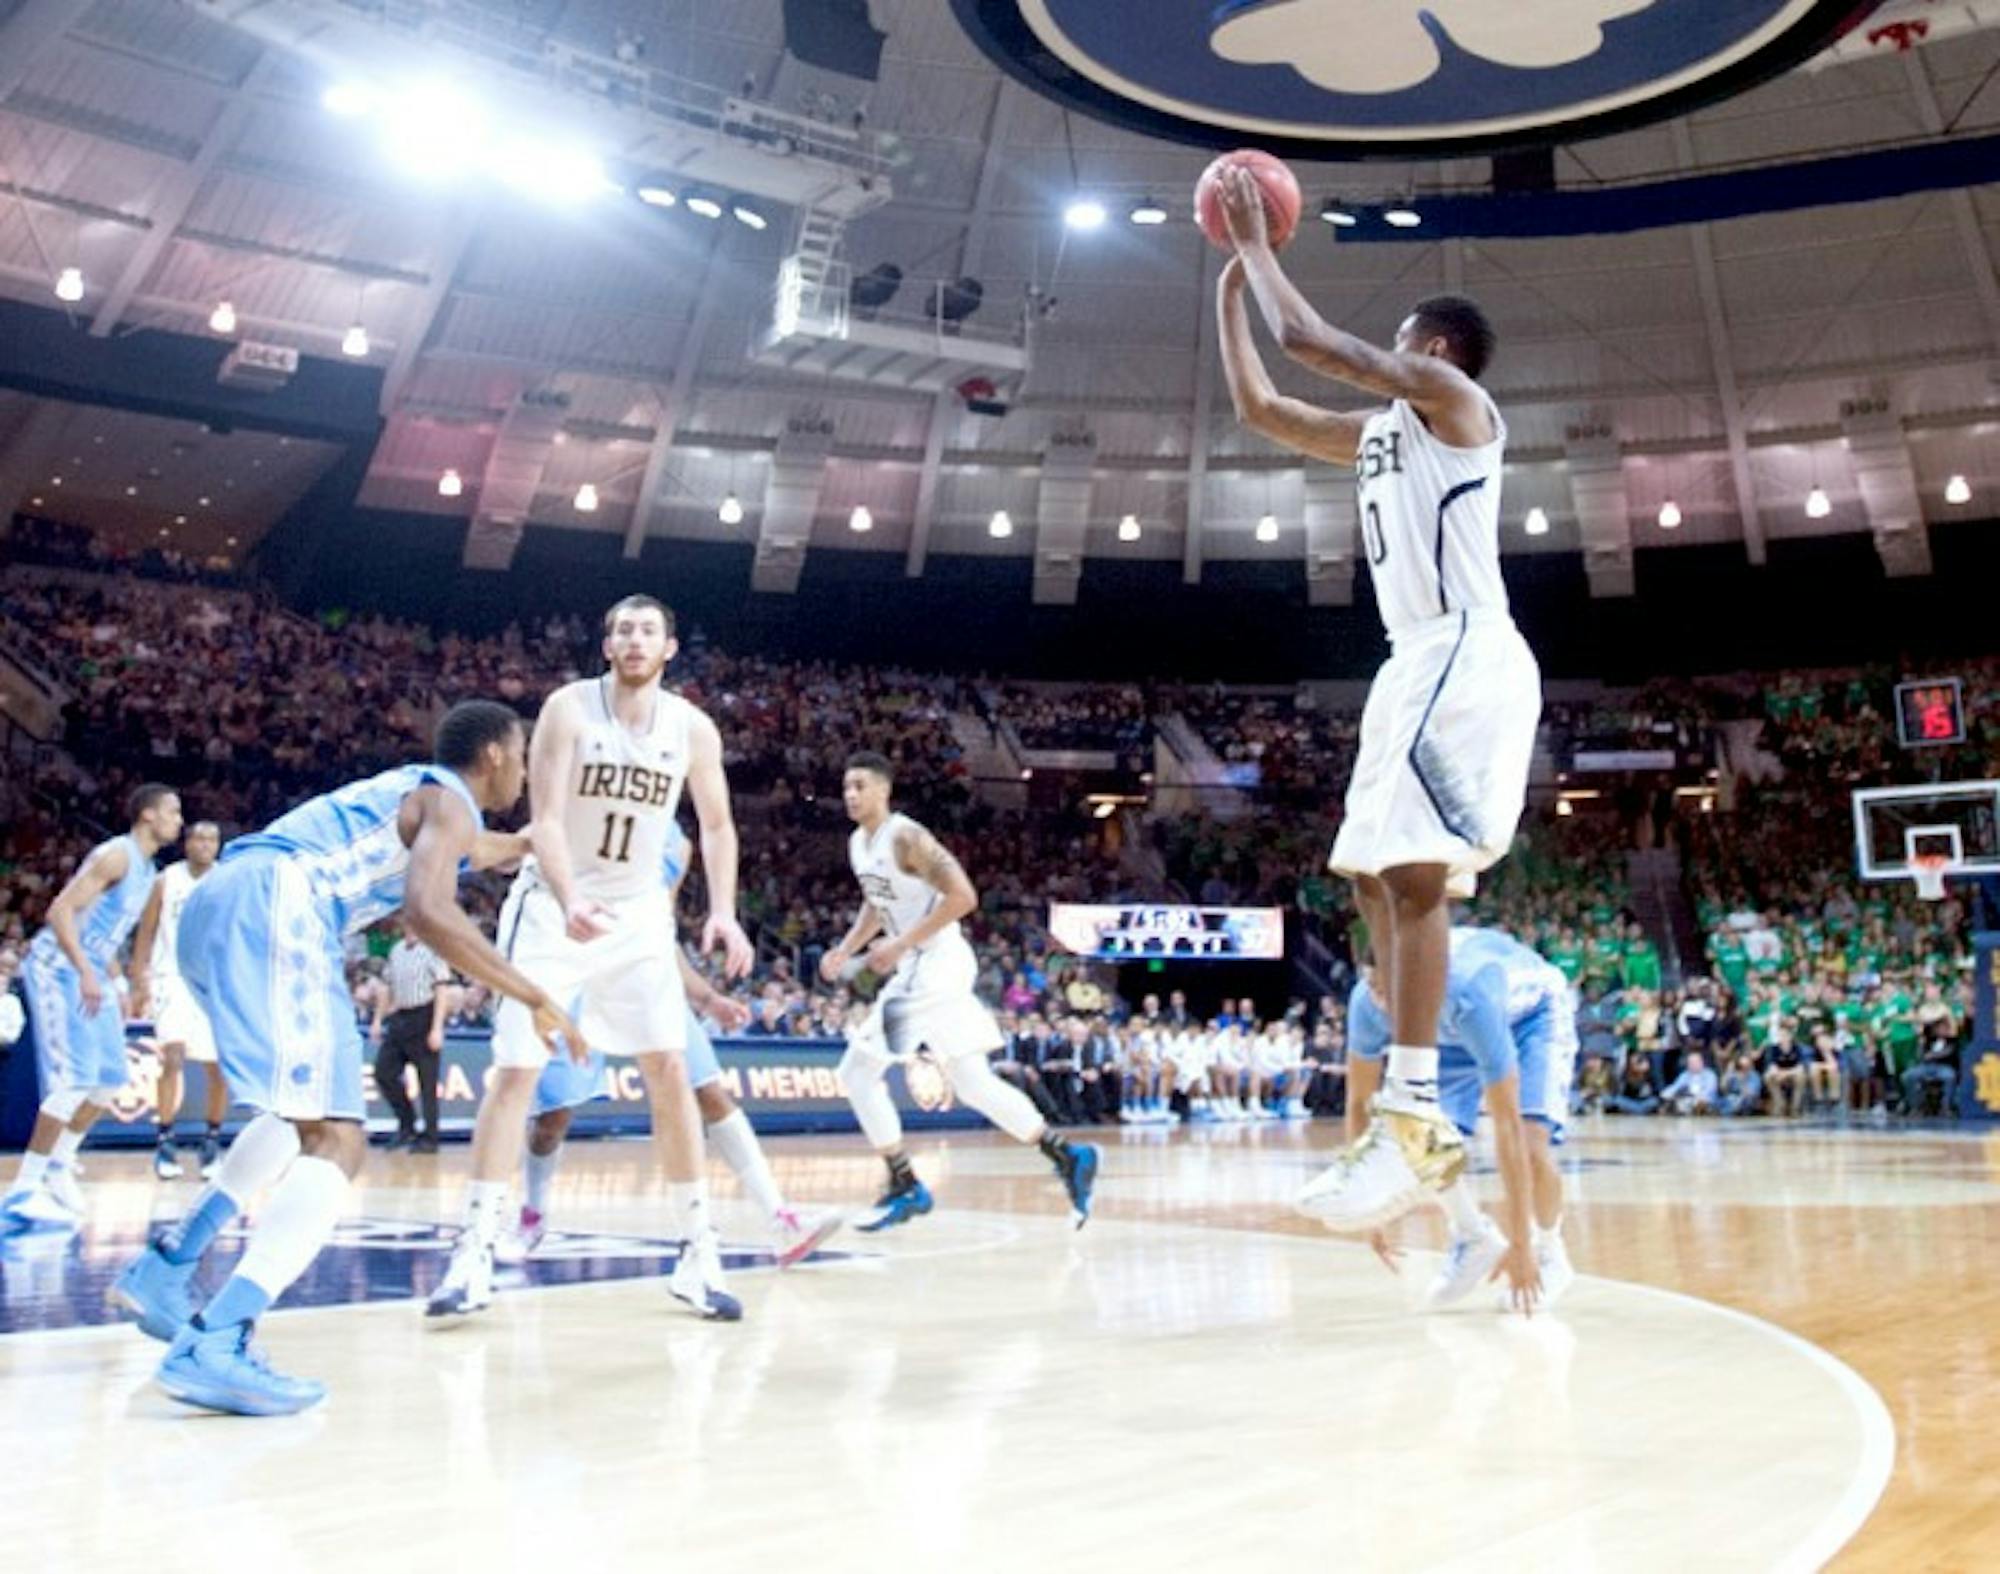 Senior guard and captain Eric Atkins releases a jump shot against North Carolina on Feb. 8 at Purcell Pavilion.